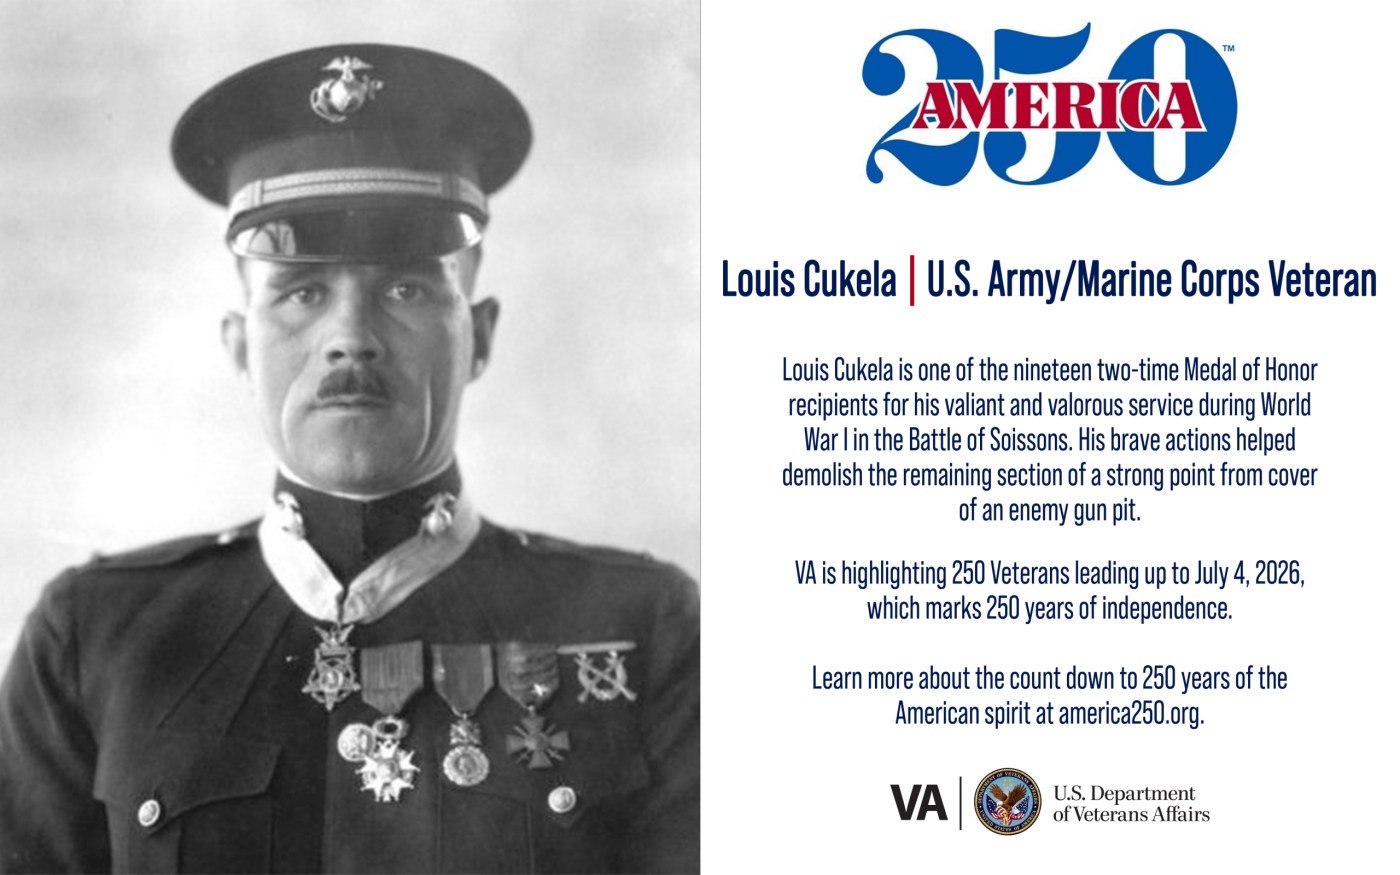 Today's America250 salute is Army and Marine Corps Veteran Louis Cukela, a two-time Medal of Honor recipient during World War I.